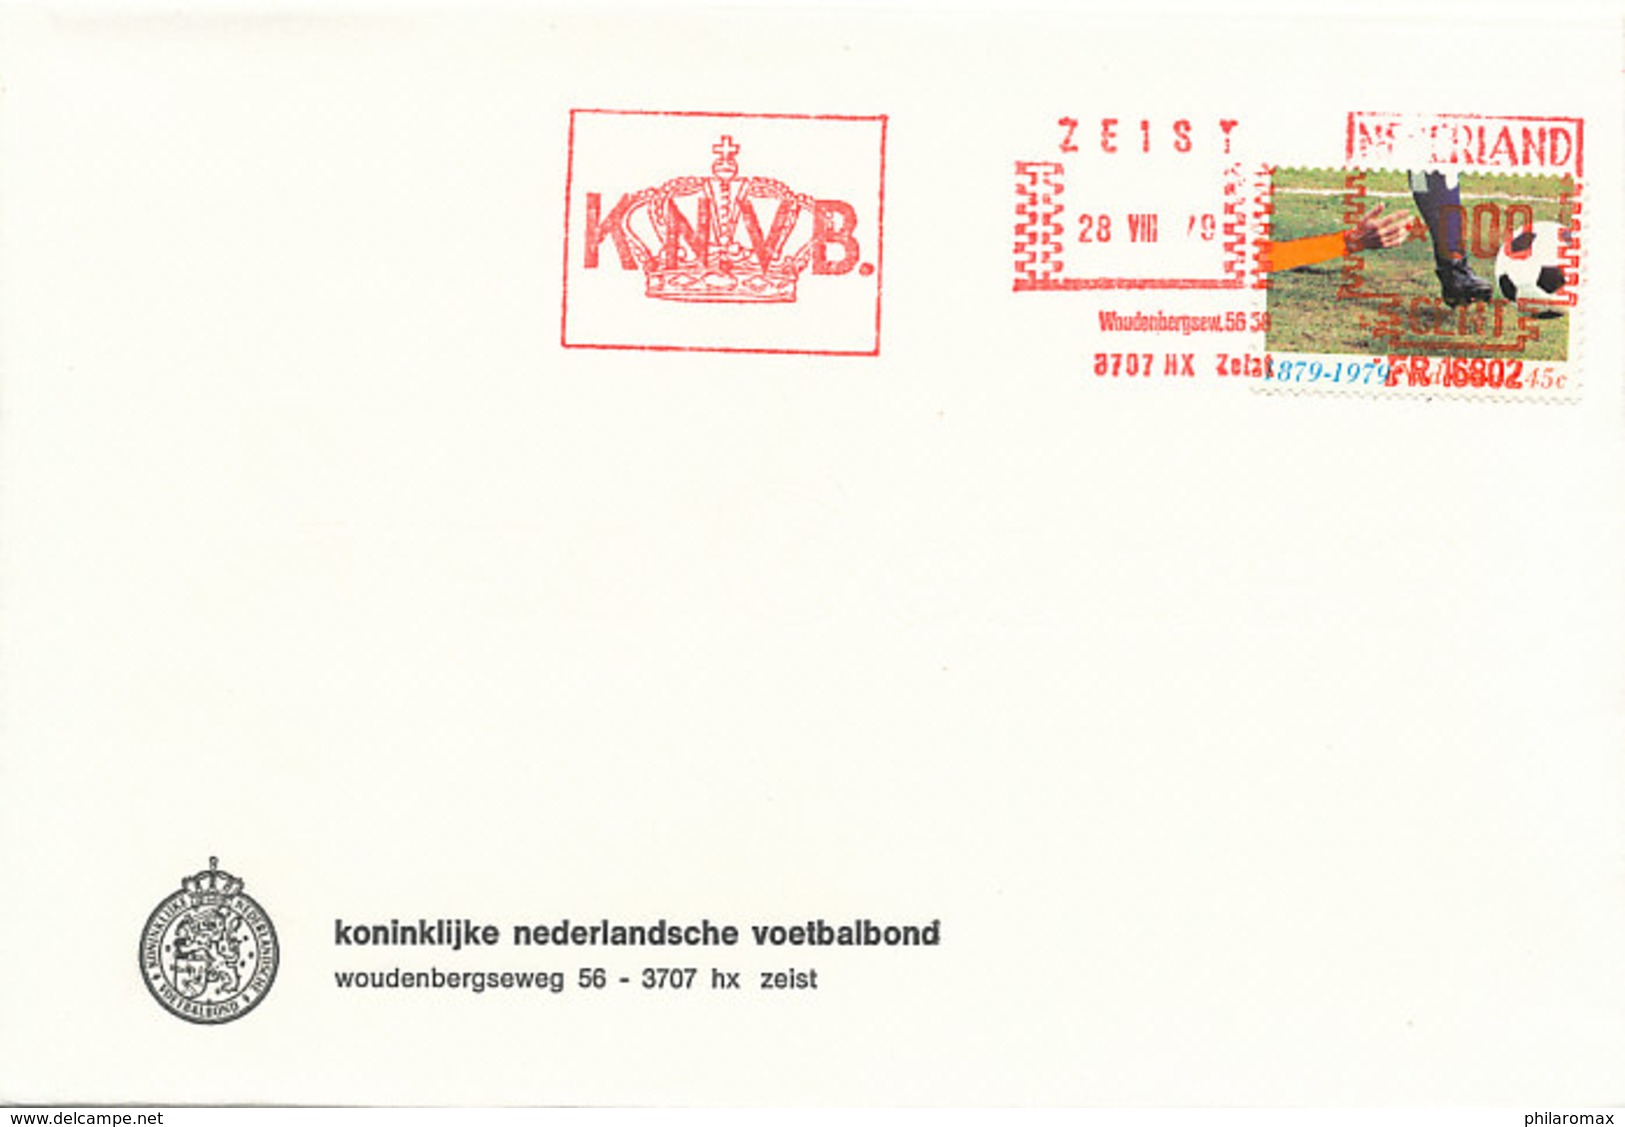 DC-1764 - 1979 NETHERLANDS - FDC 100 YEARS JUBILEE DUTCH SOCCER ORGANIZATION KNVB ZEIST - RED METER - Equipos Famosos